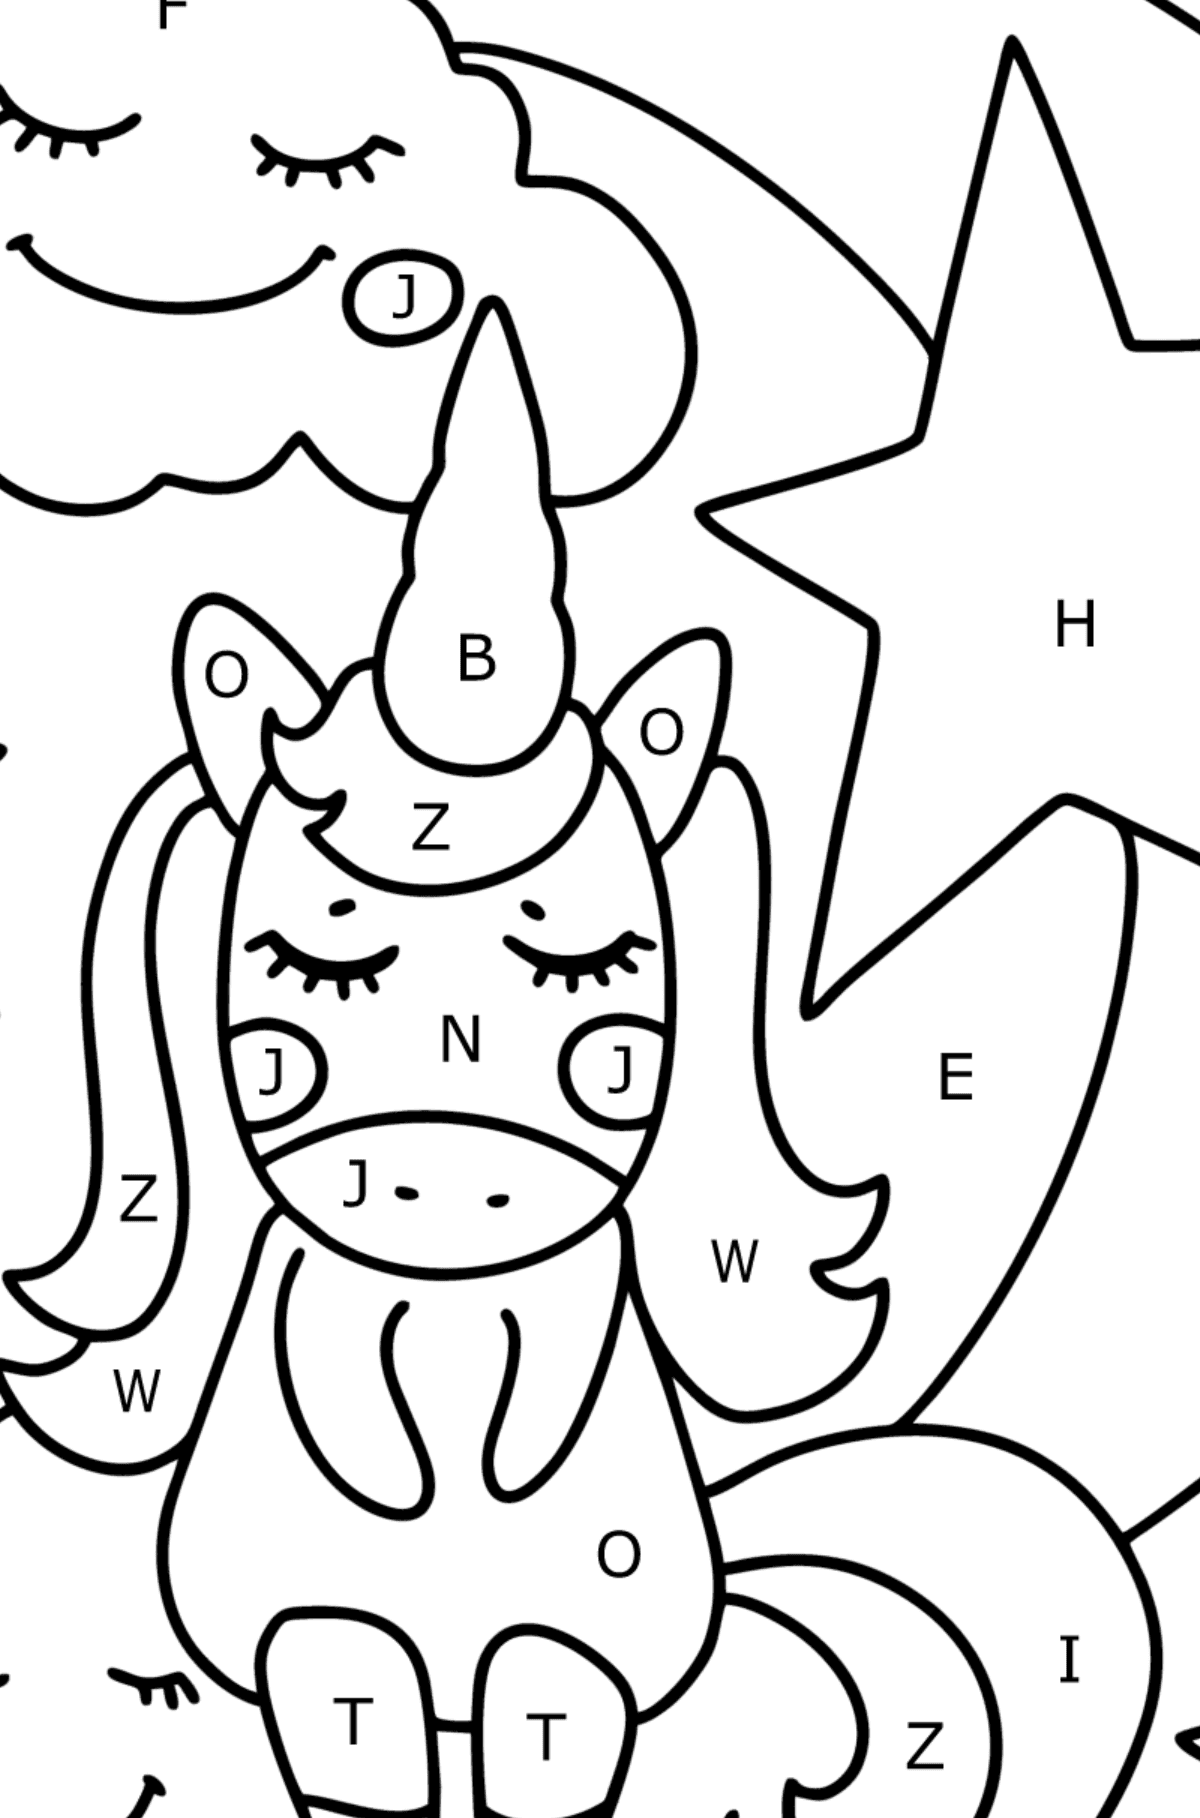 Star unicorn coloring page - Coloring by Letters for Kids